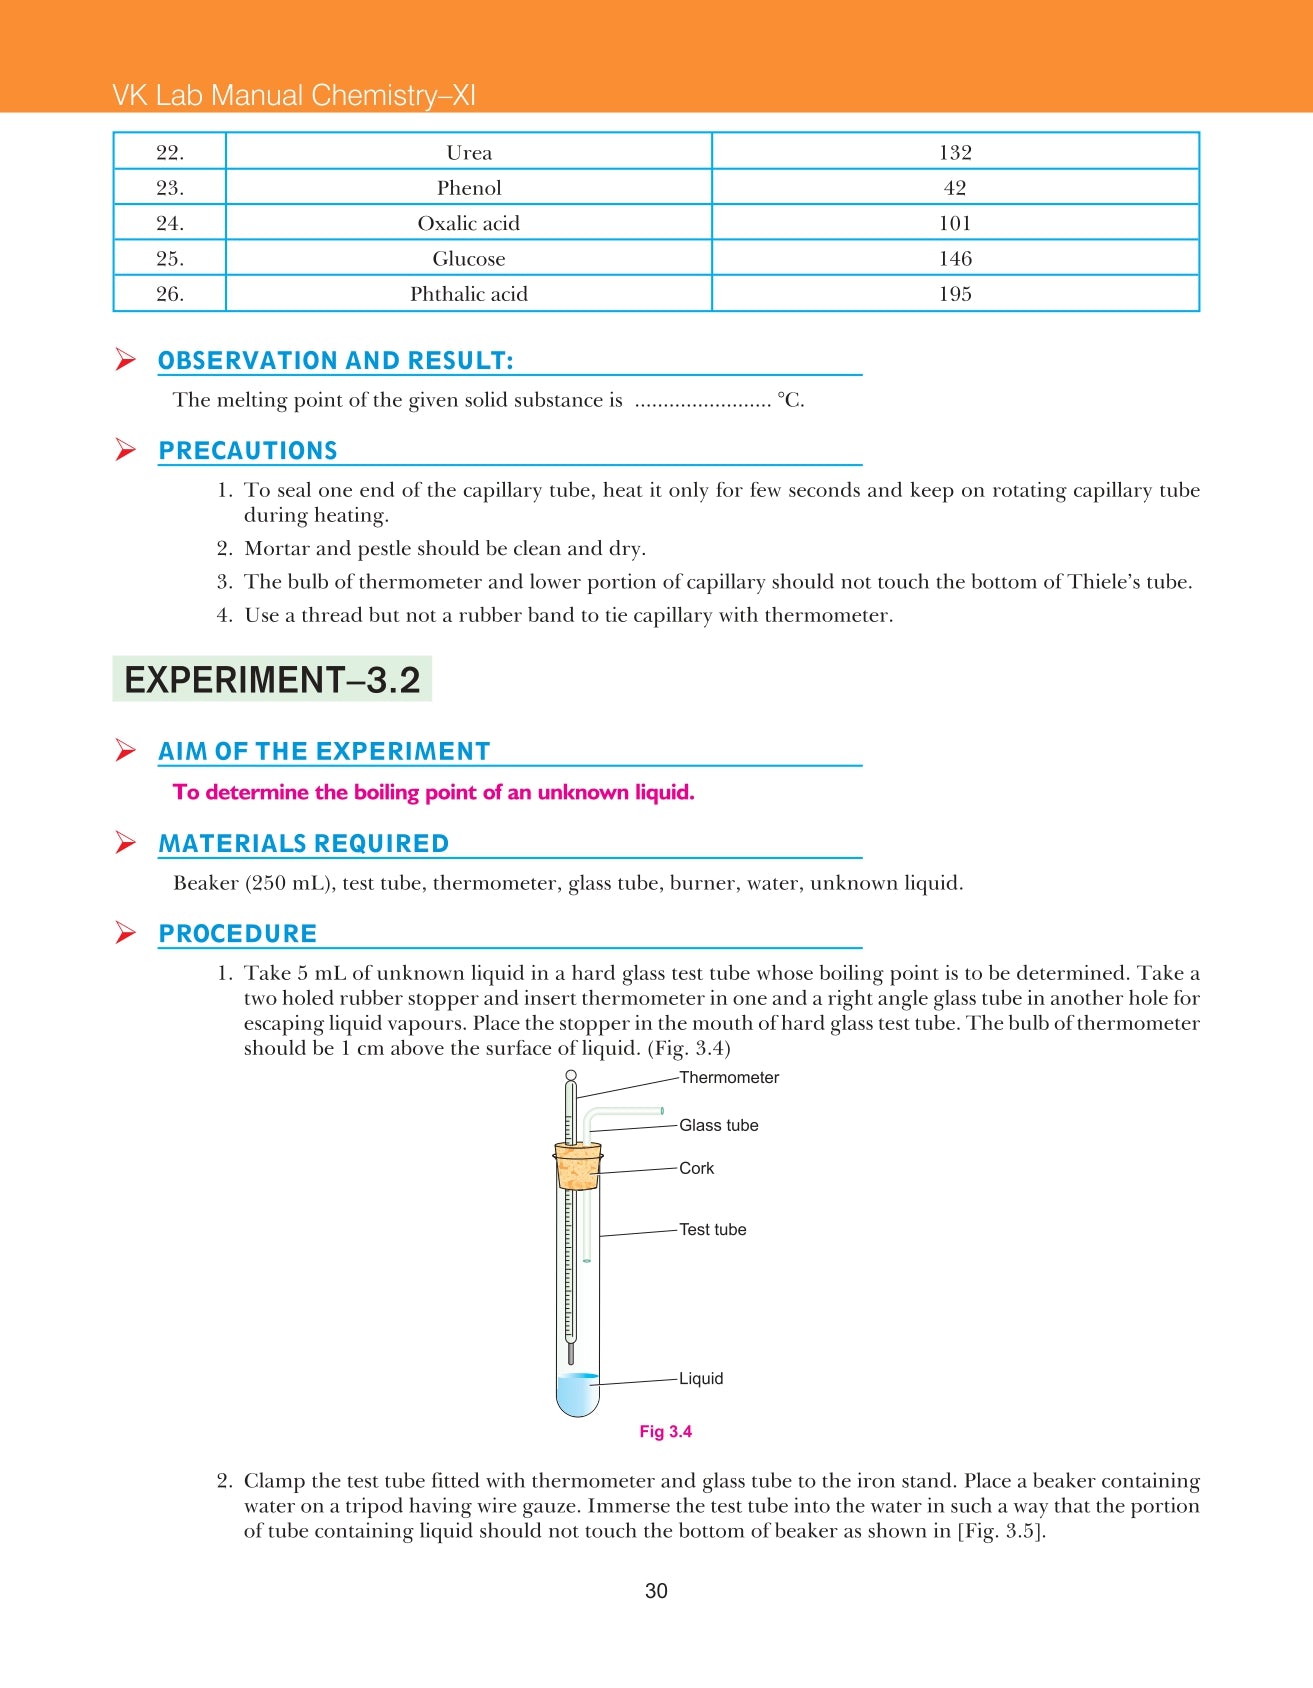 Lab Manual Chemistry (HB) With Worksheet | For Class 11 | CBSE Based